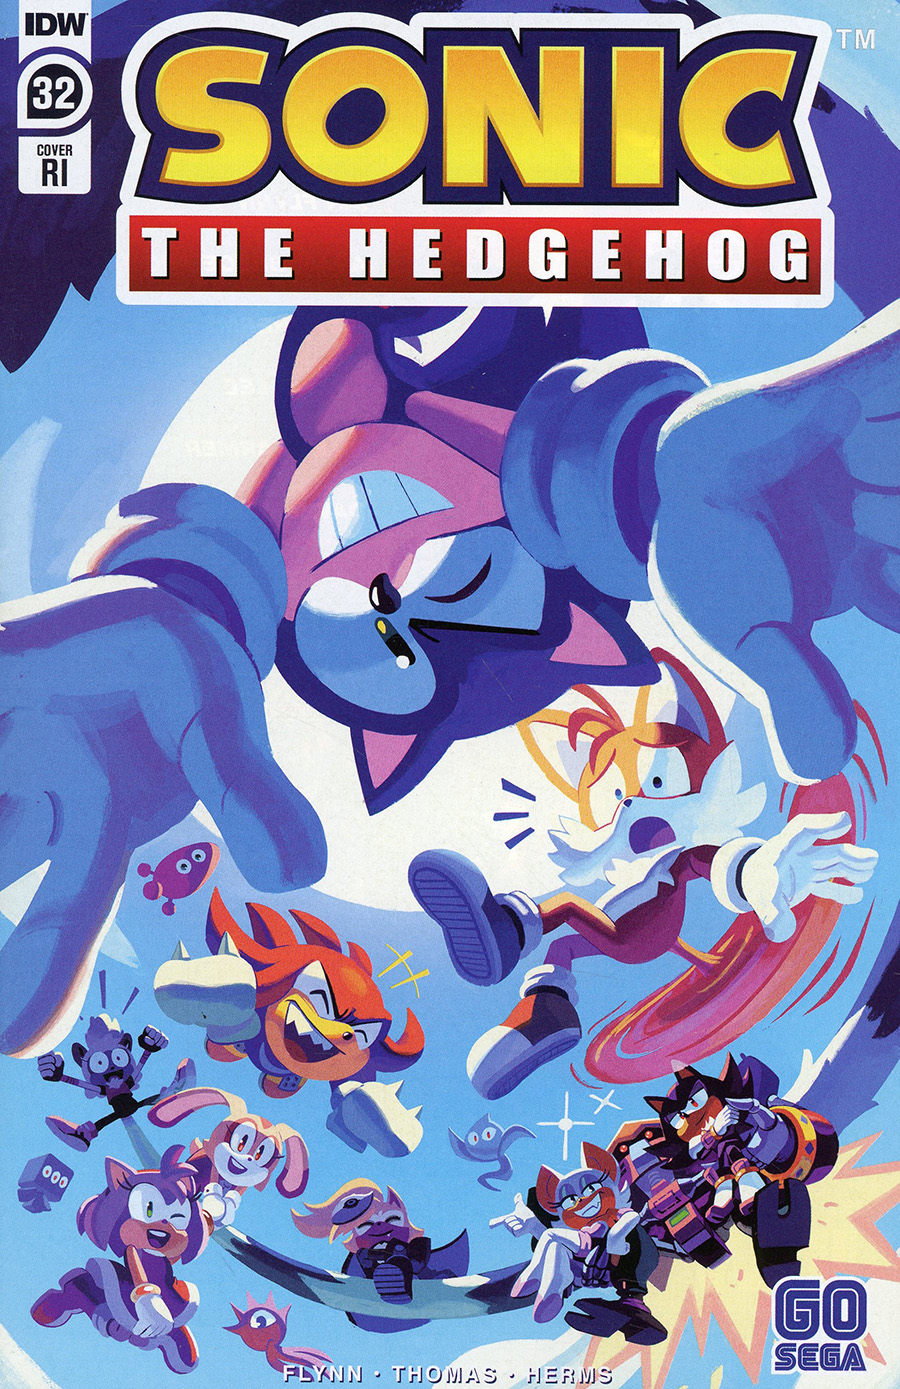 Sonic The Hedgehog Vol 3 #32 Cover C Incentive Nathalie Fourdraine Variant Cover